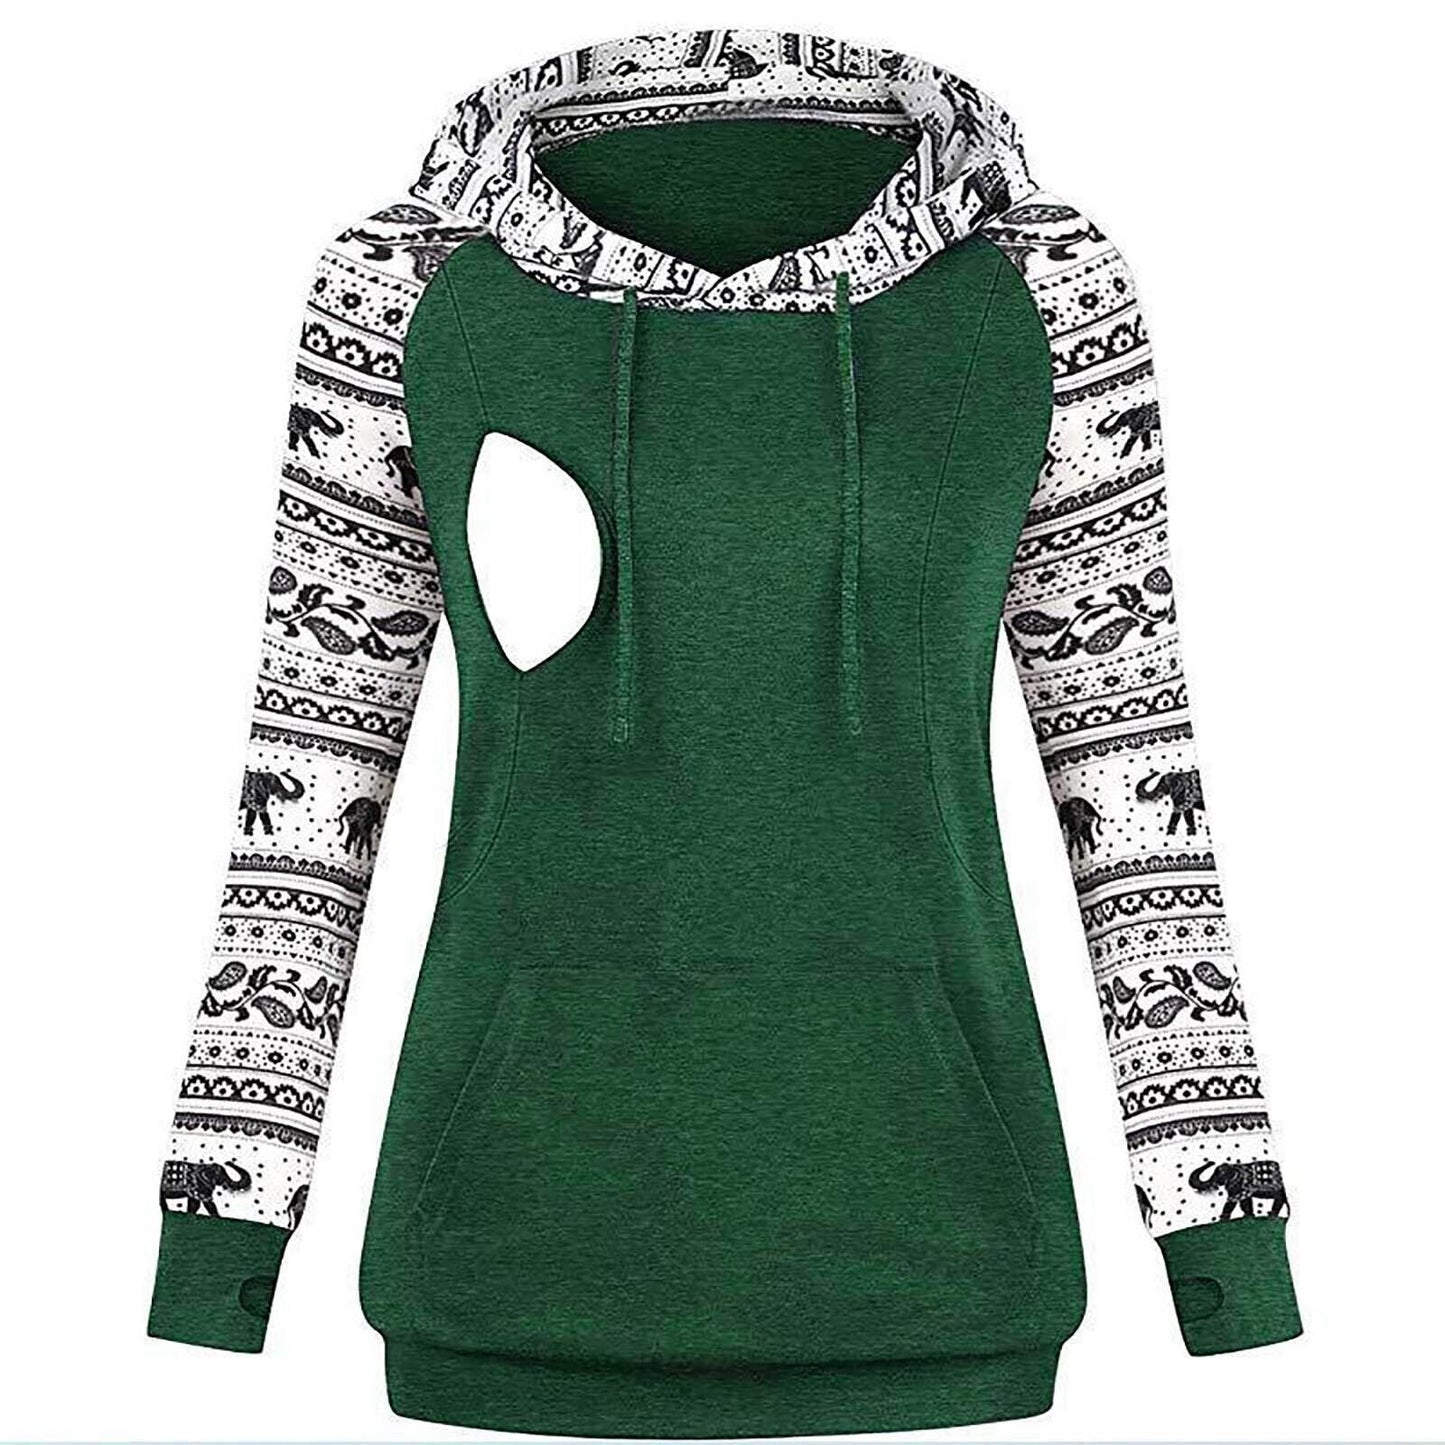 Extra Warm Hoodies Women Women'S Casual Top Hooded and Printed Breastfeeding